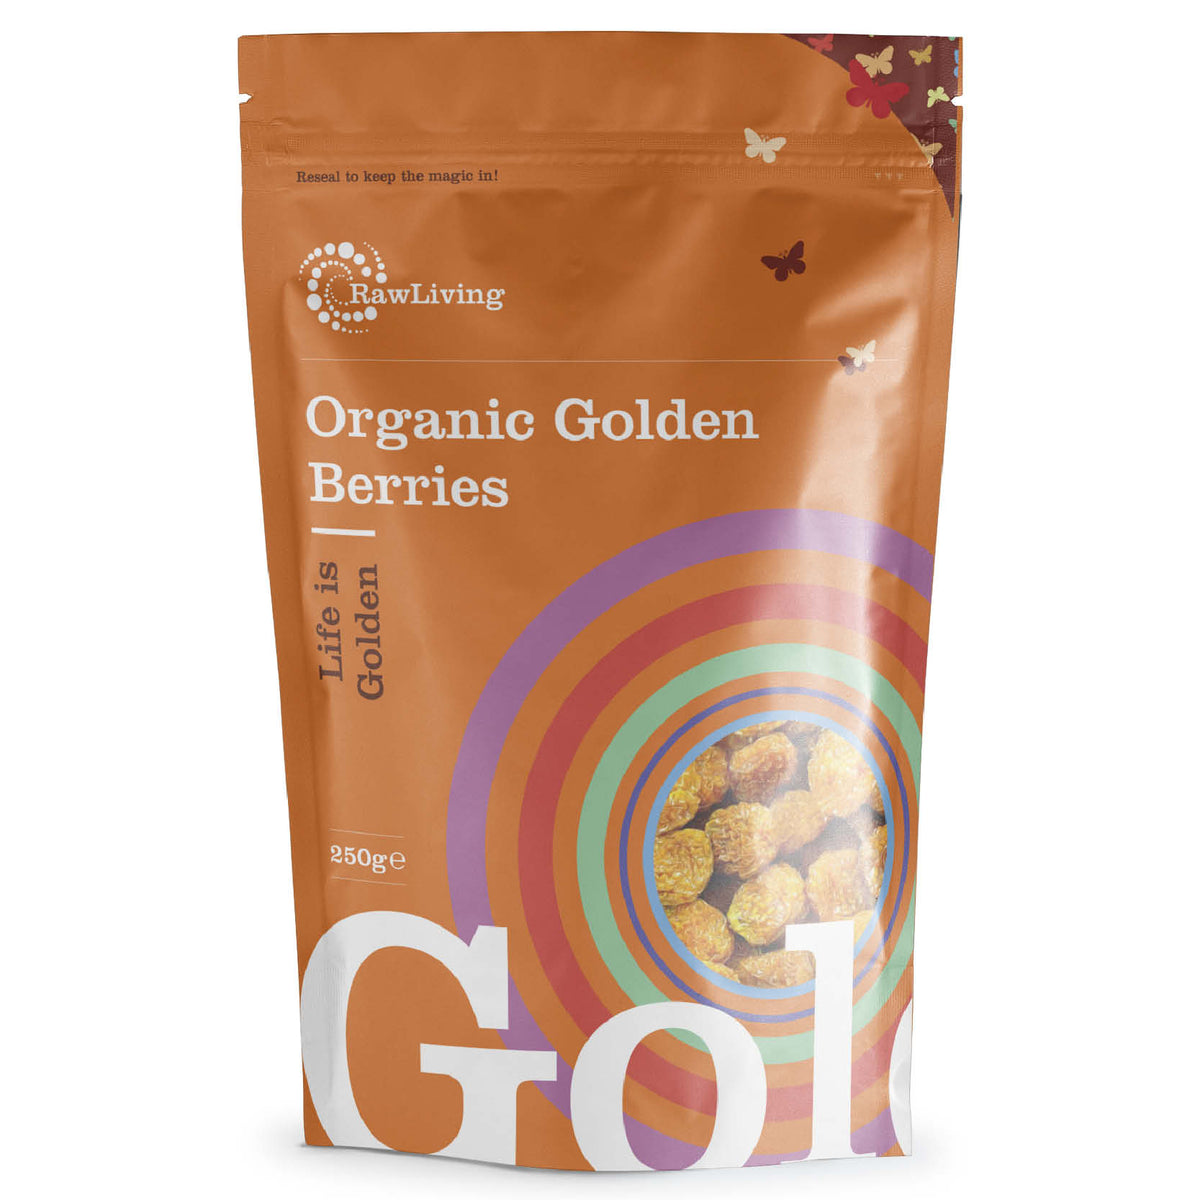 Organic Goldenberries | Raw Living UK | Raw Foods &amp; Fruits | Raw Living Organic Goldenberries (Incan Berries), are a special variety with an unusual natural sweet flavour, from Peru. Vitamin rich &amp; 100% Natural.